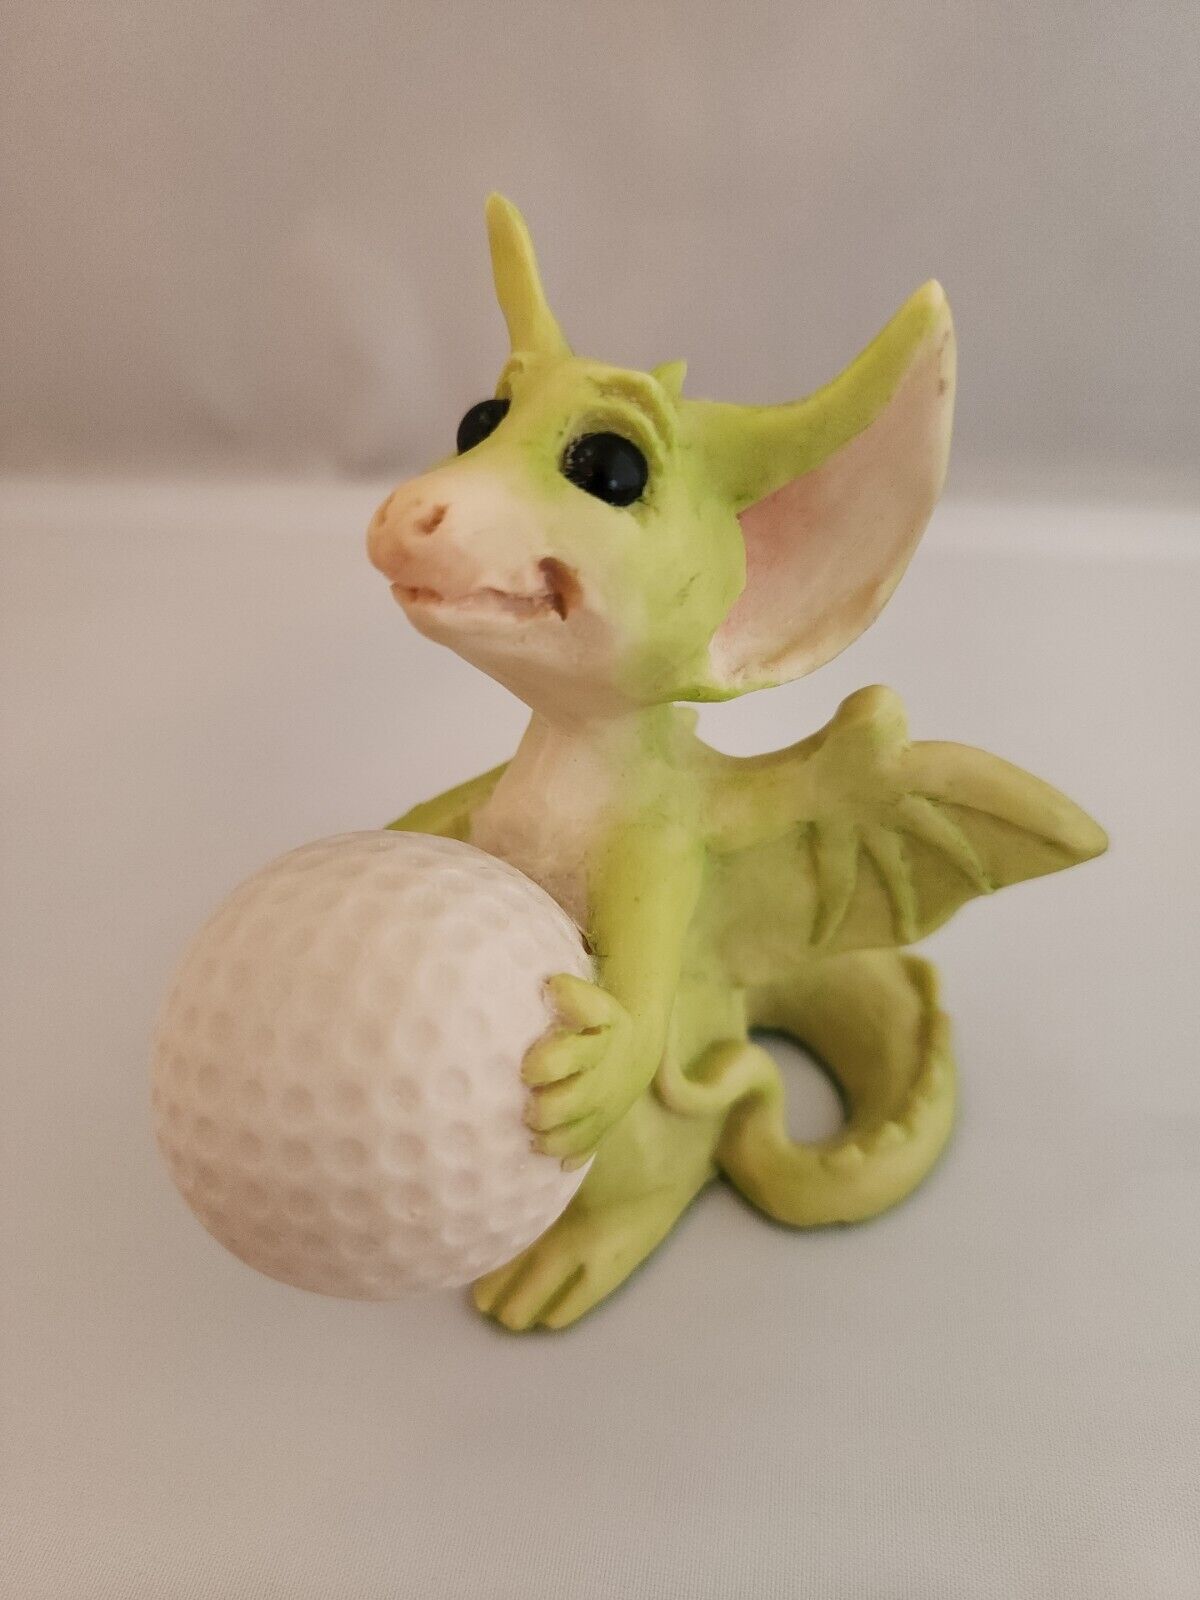 💝💝 Whimsical World of pocket dragons Putt Putt Vintage 1991 Mint Condition